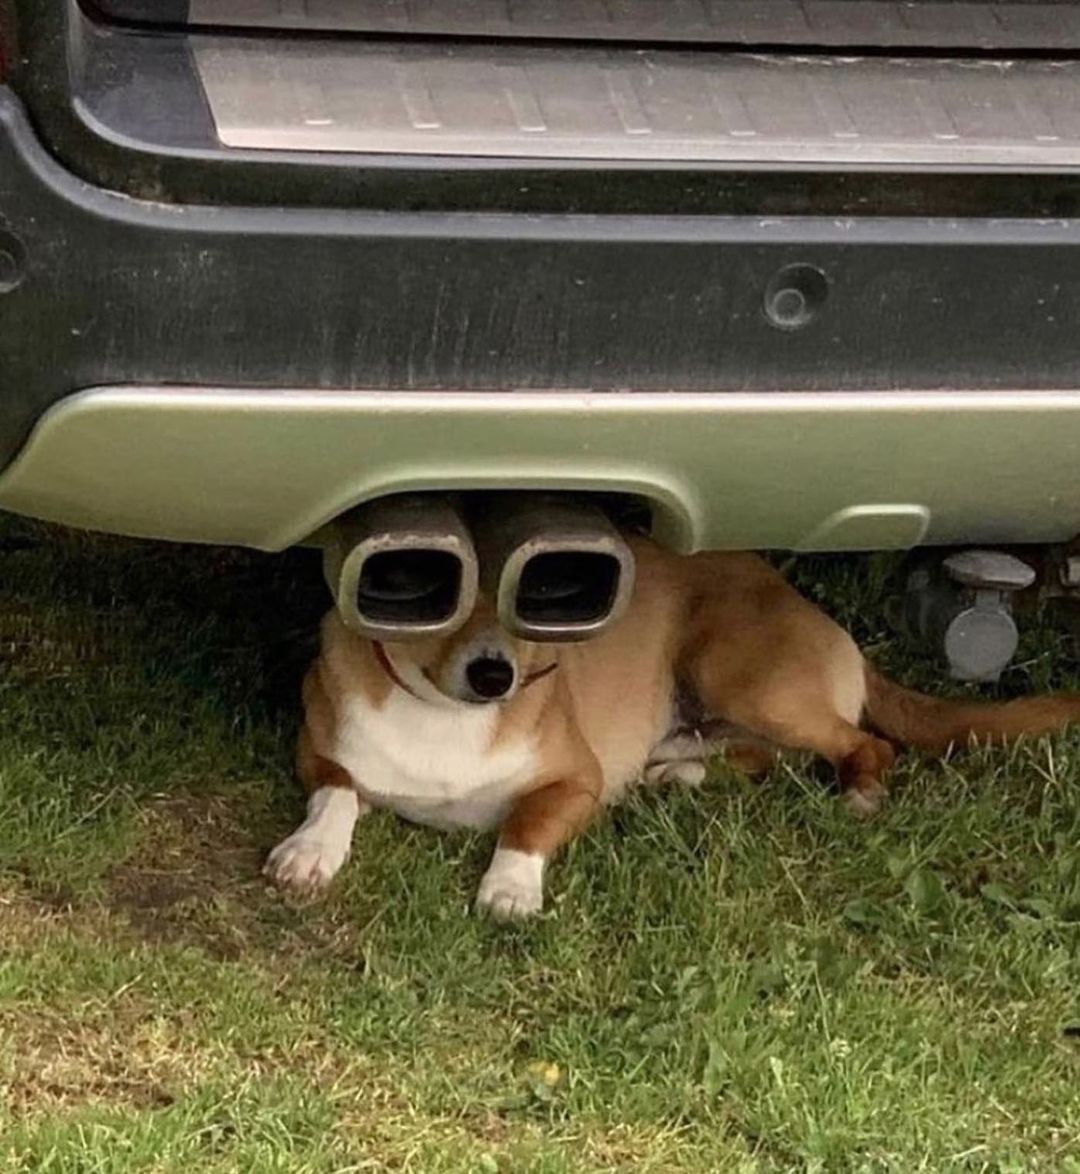 a dog sitting with their head behind the exhaust pipes of a car so it looks like they're looking through them like binoculars